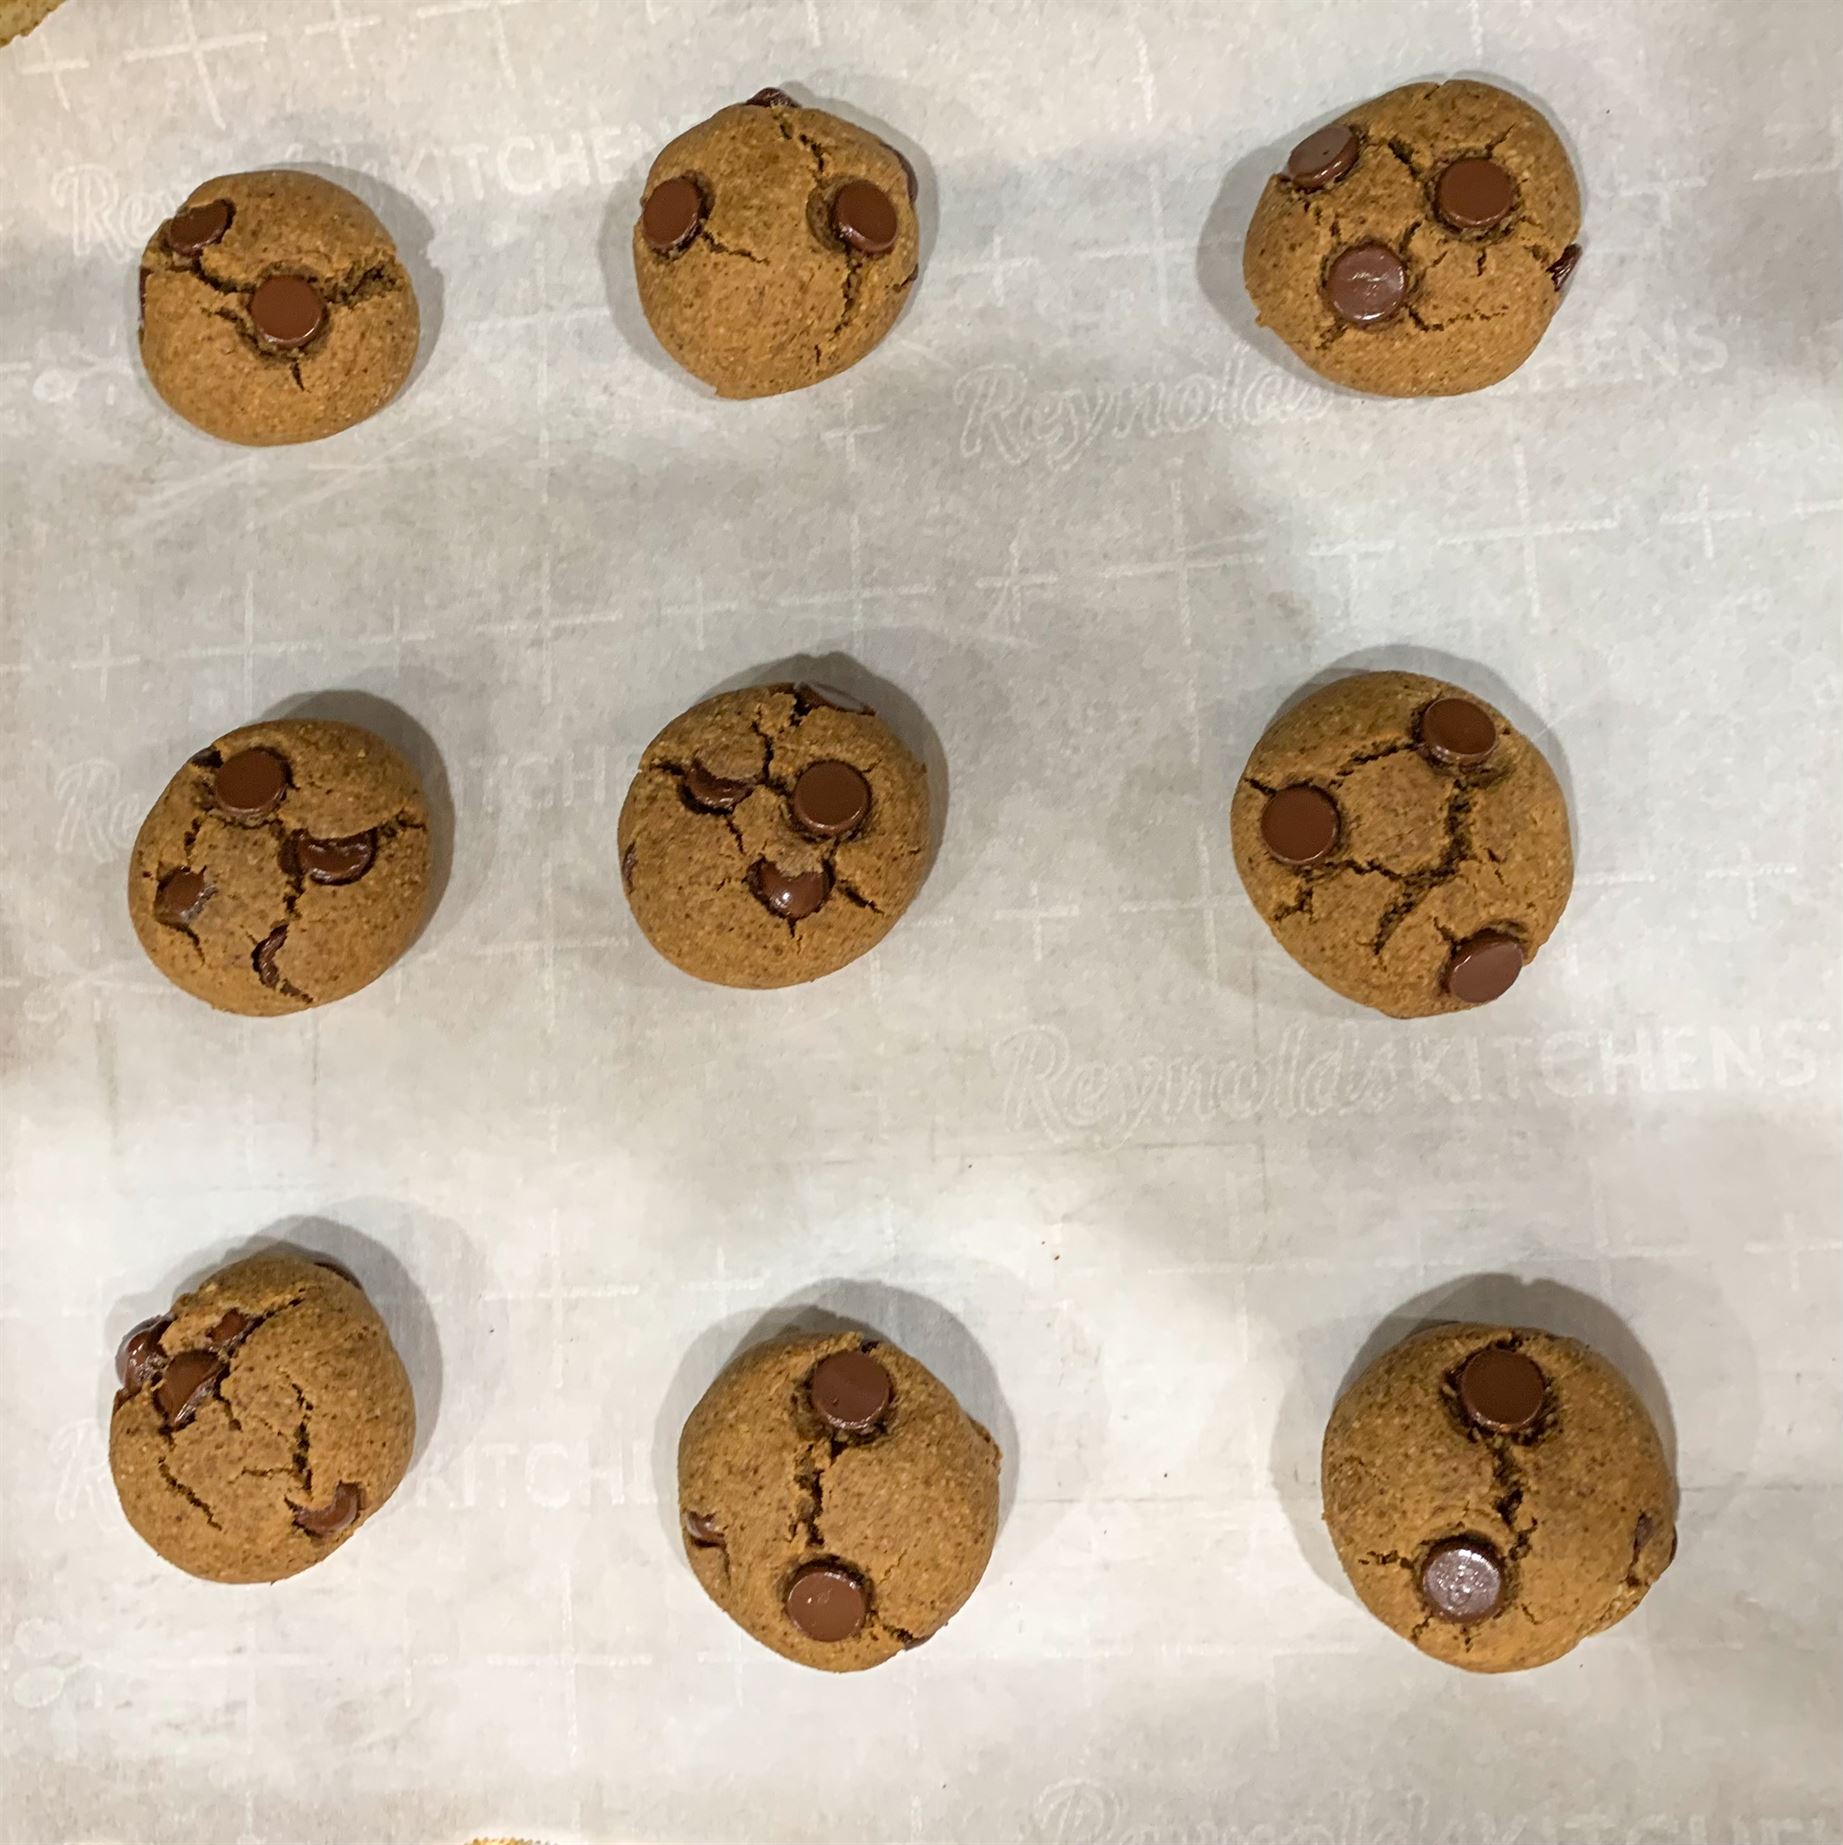 The almond flour in these cookies keeps them from rising too much, which allows you to fit more on each tray. Samantha Bailey | The Montclarion